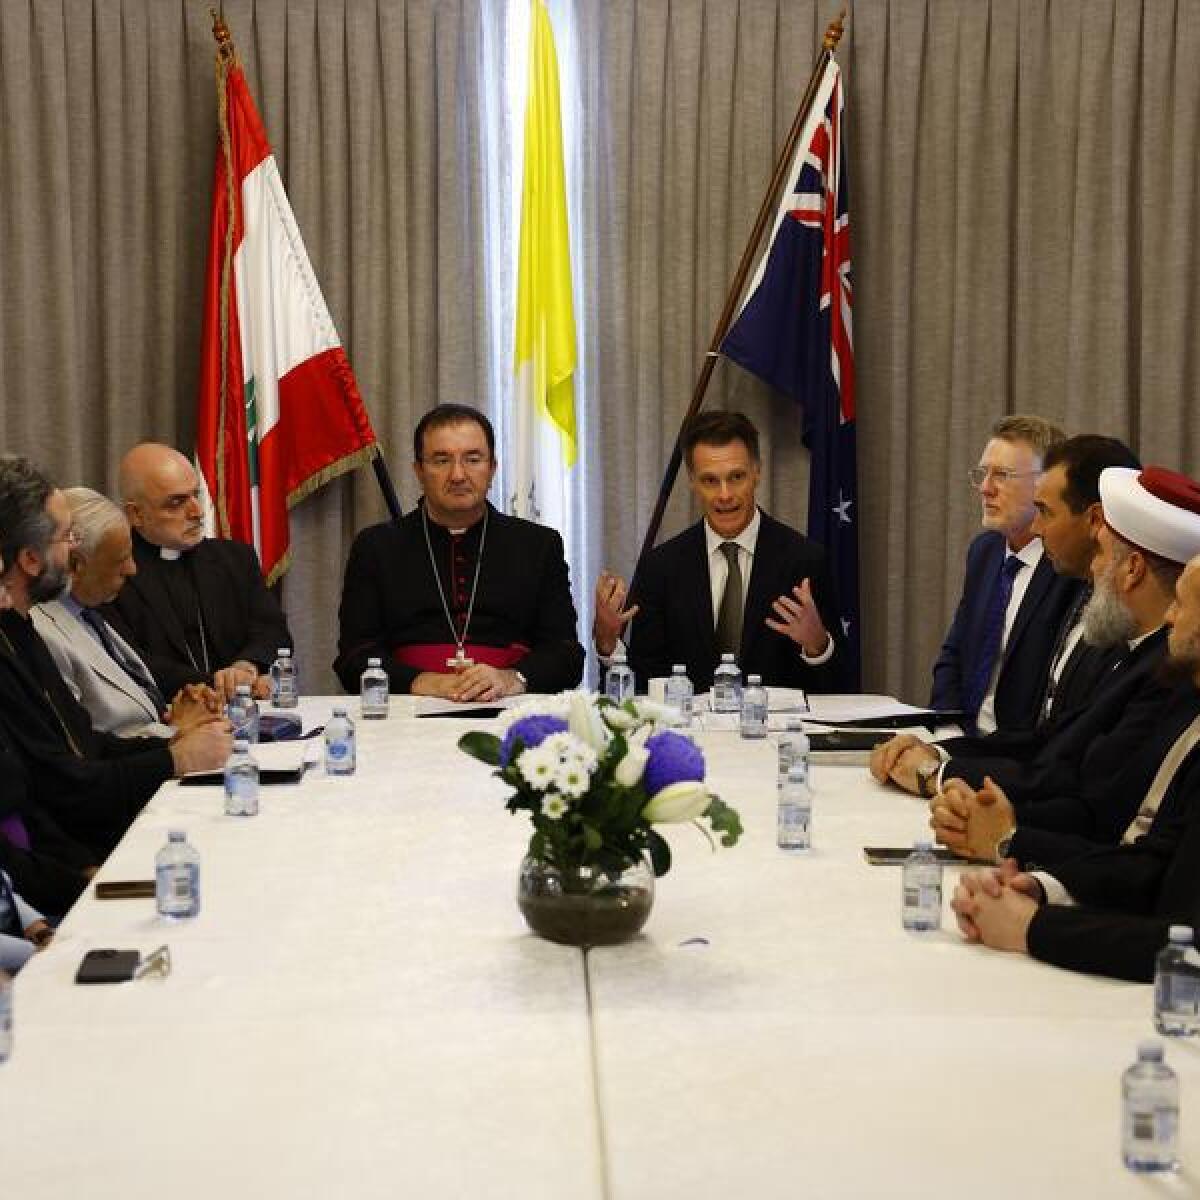 NSW Premier Chris Minns speaks during a meeting with religious leaders